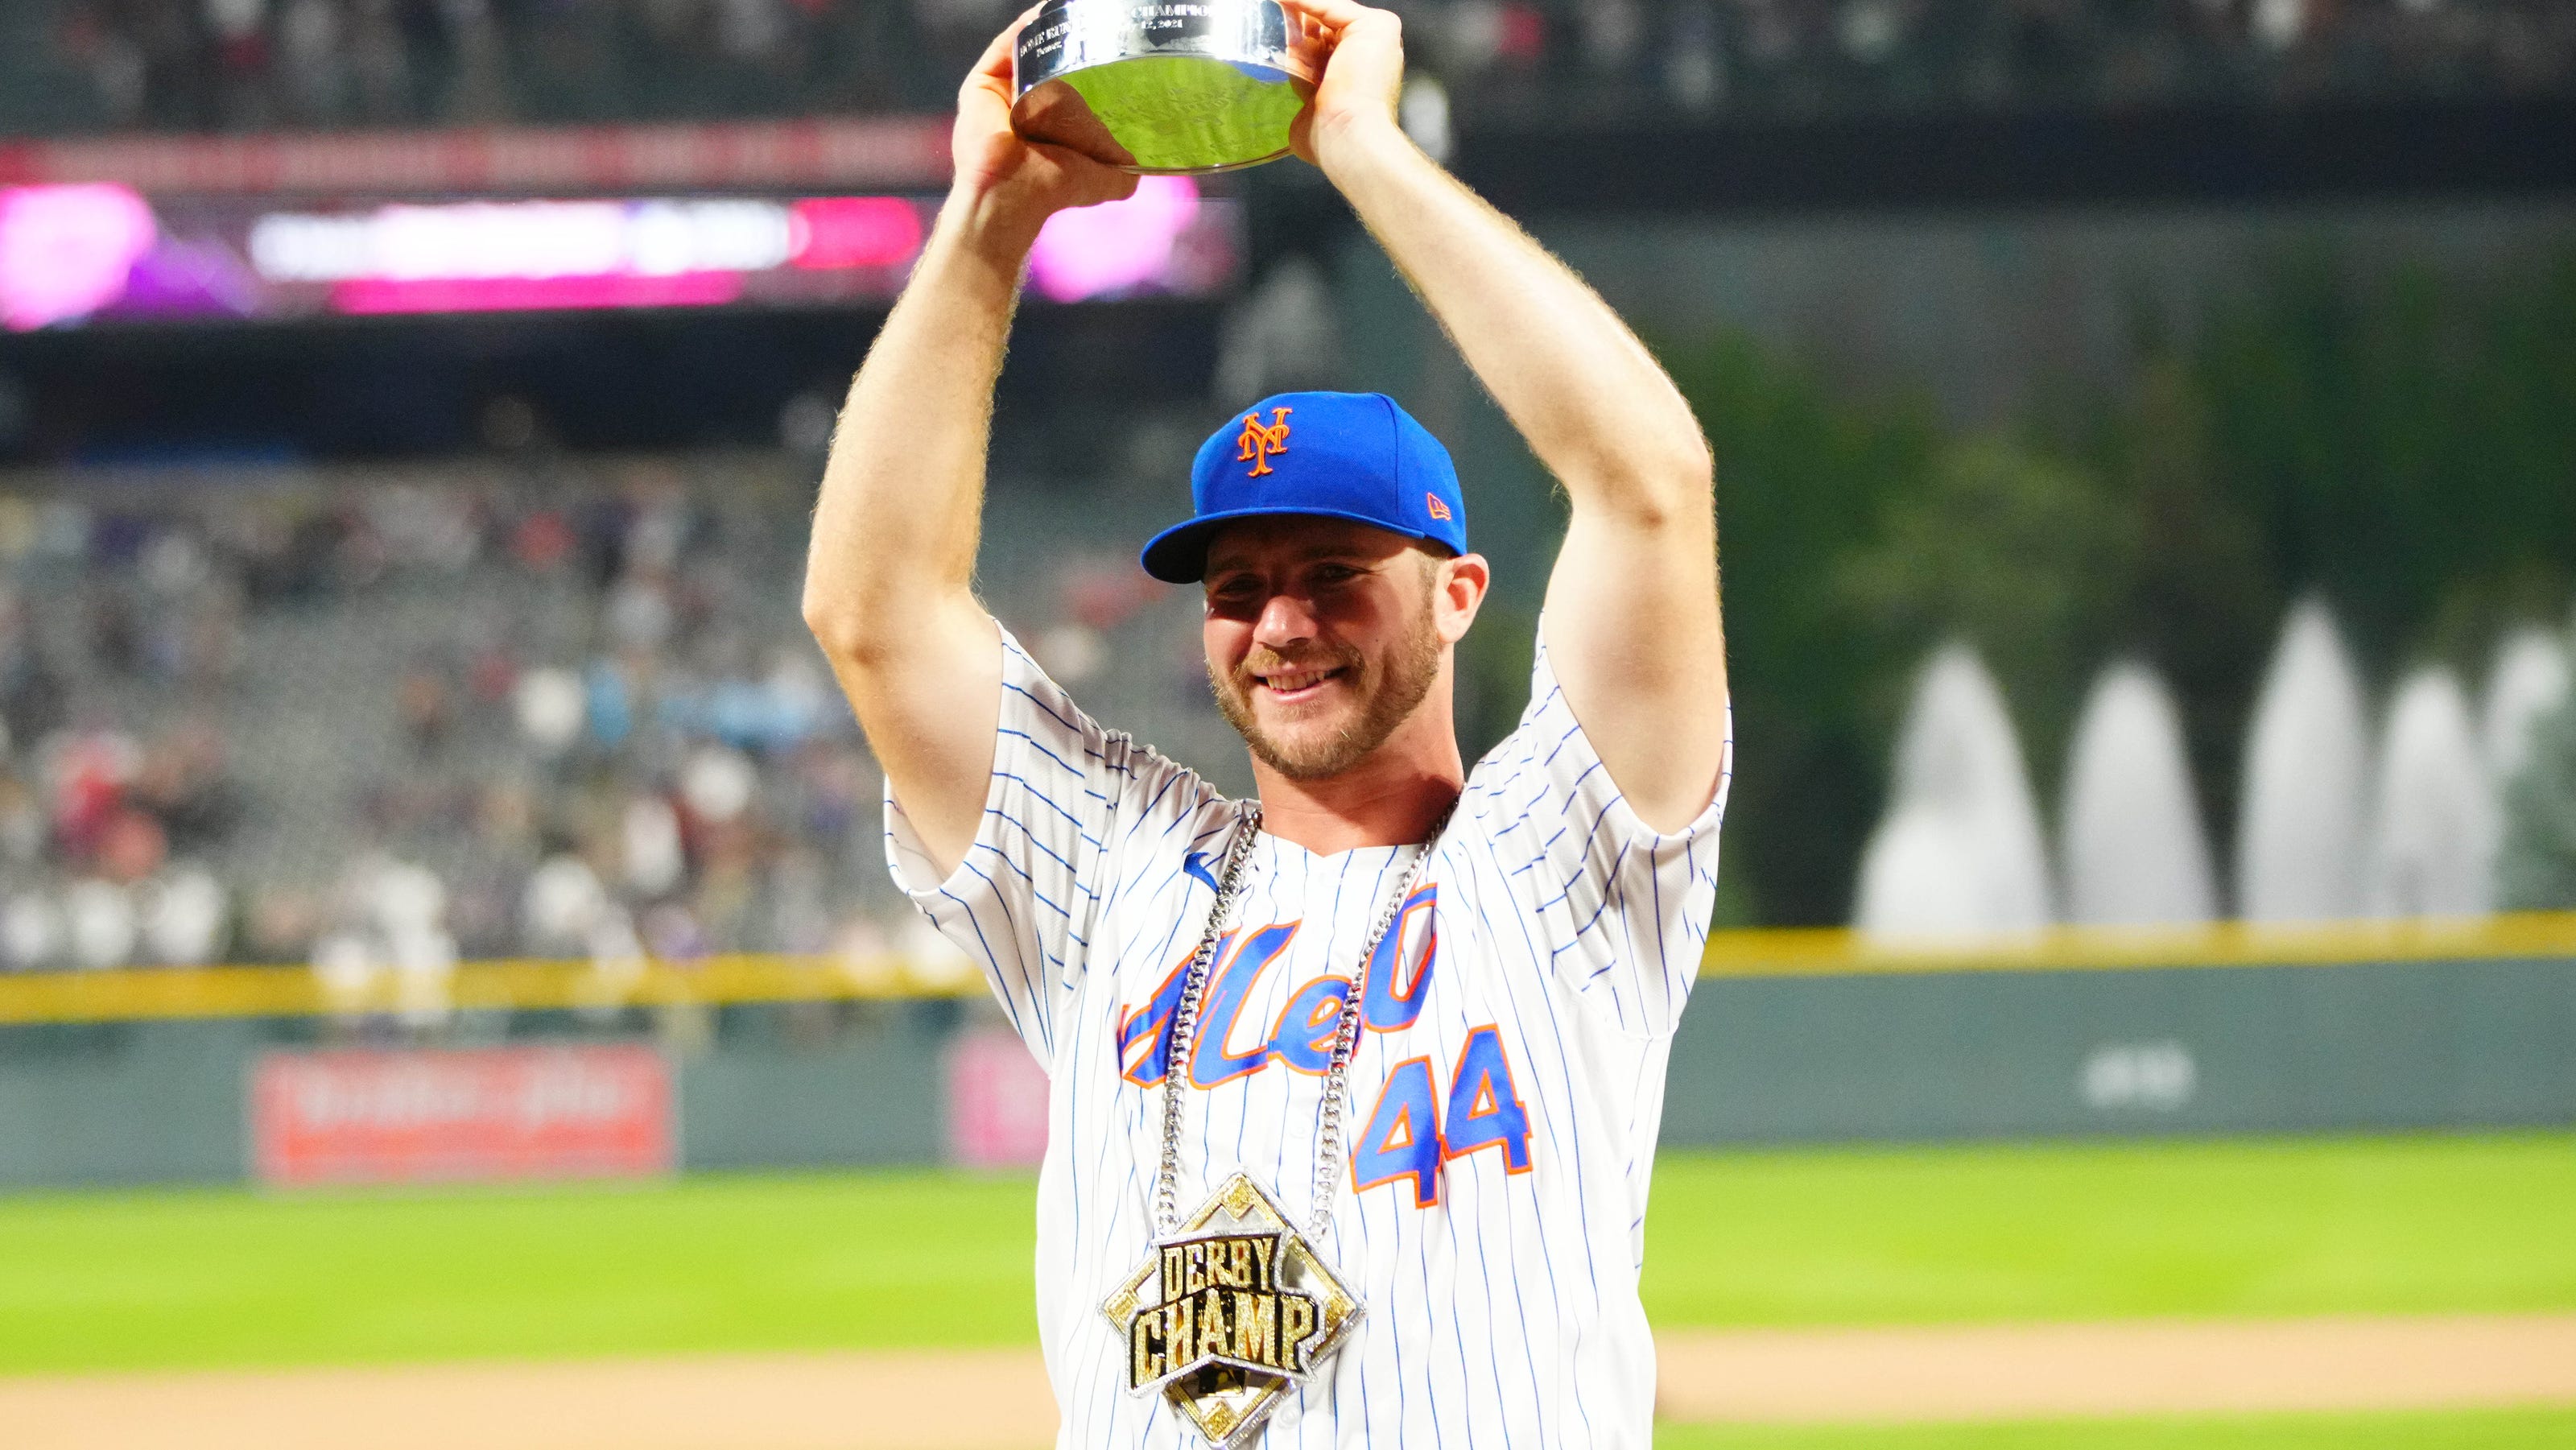 Home Run Derby predictions 2022 Pete Alonso is favorite for a 3peat